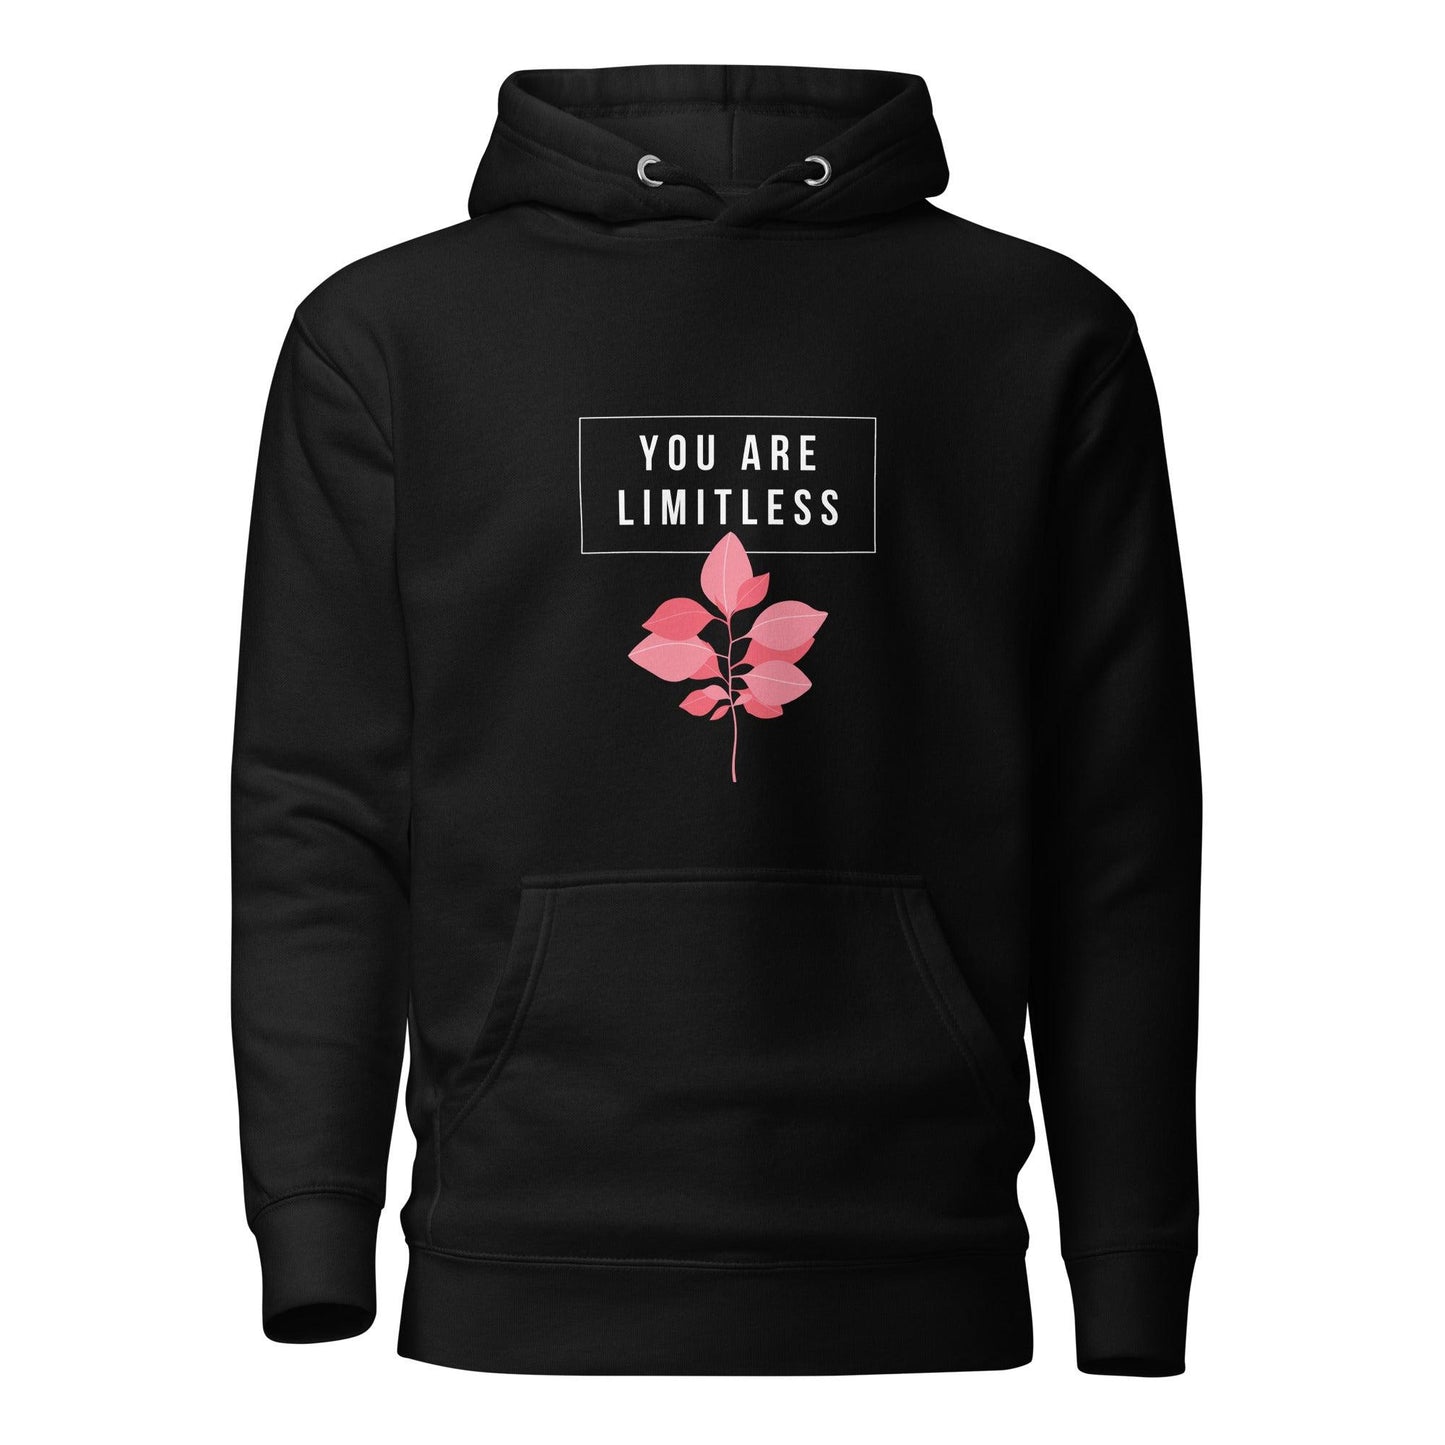 You Are Limitless Unisex Hoodie | Positive Affirmation Clothing - Affirm Effect